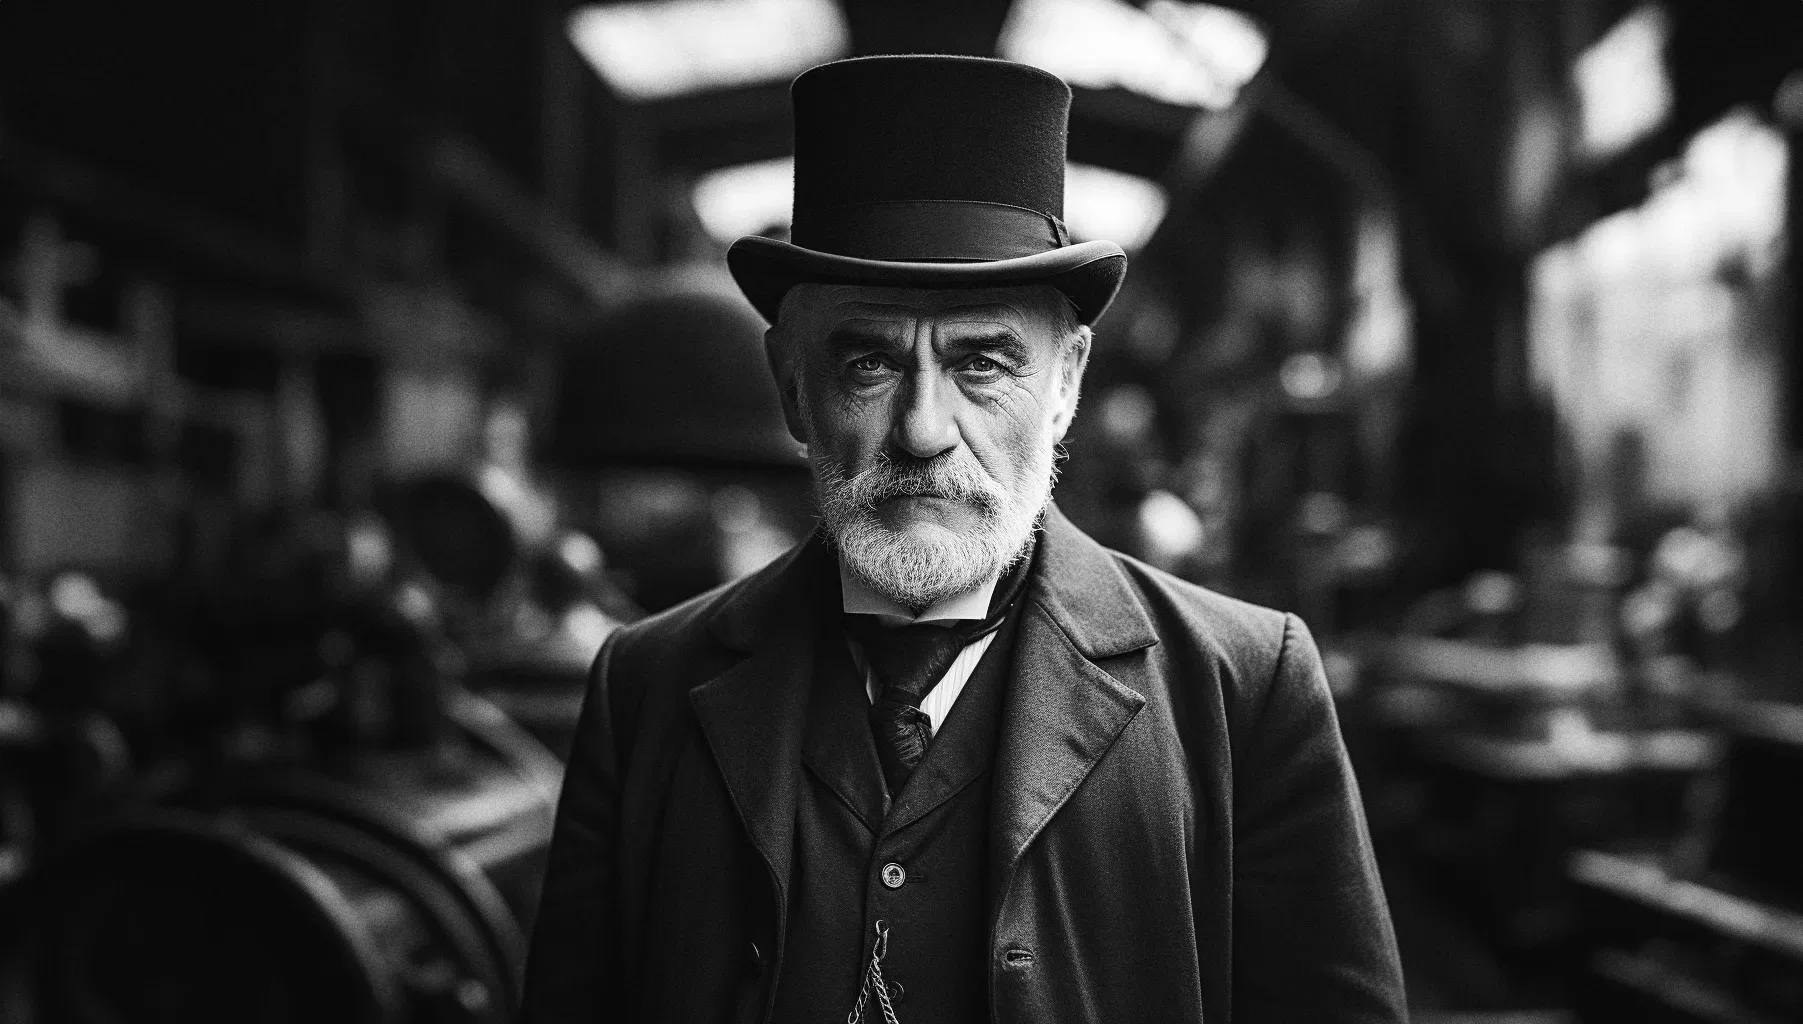 An old man in a top hat standing in a train station.  Fox Talbot